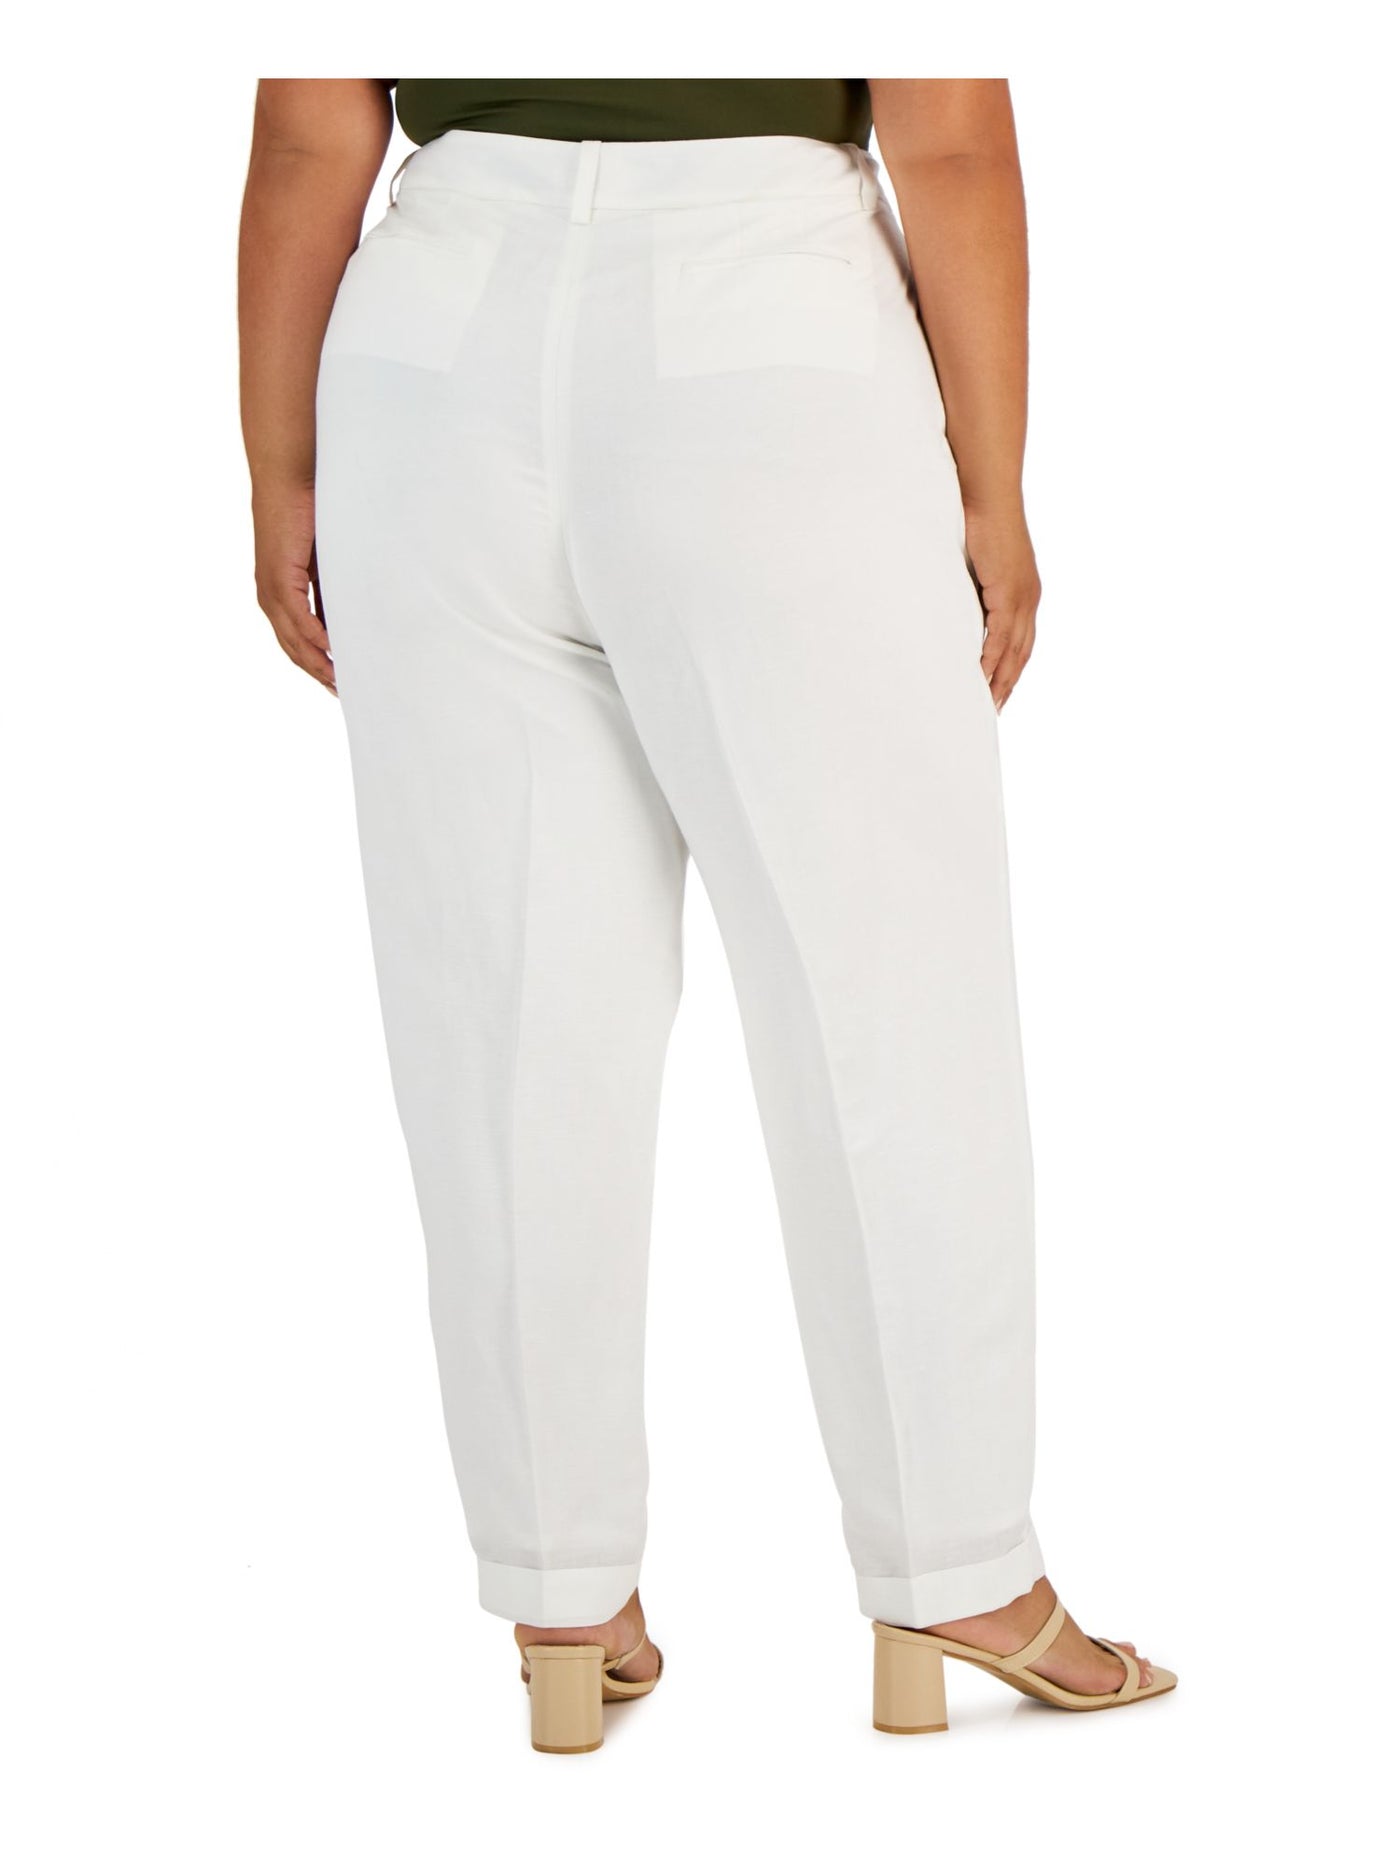 CALVIN KLEIN Womens White Pocketed Zippered Hook And Bar Closure Pleated Wear To Work Straight leg Pants Plus 18W